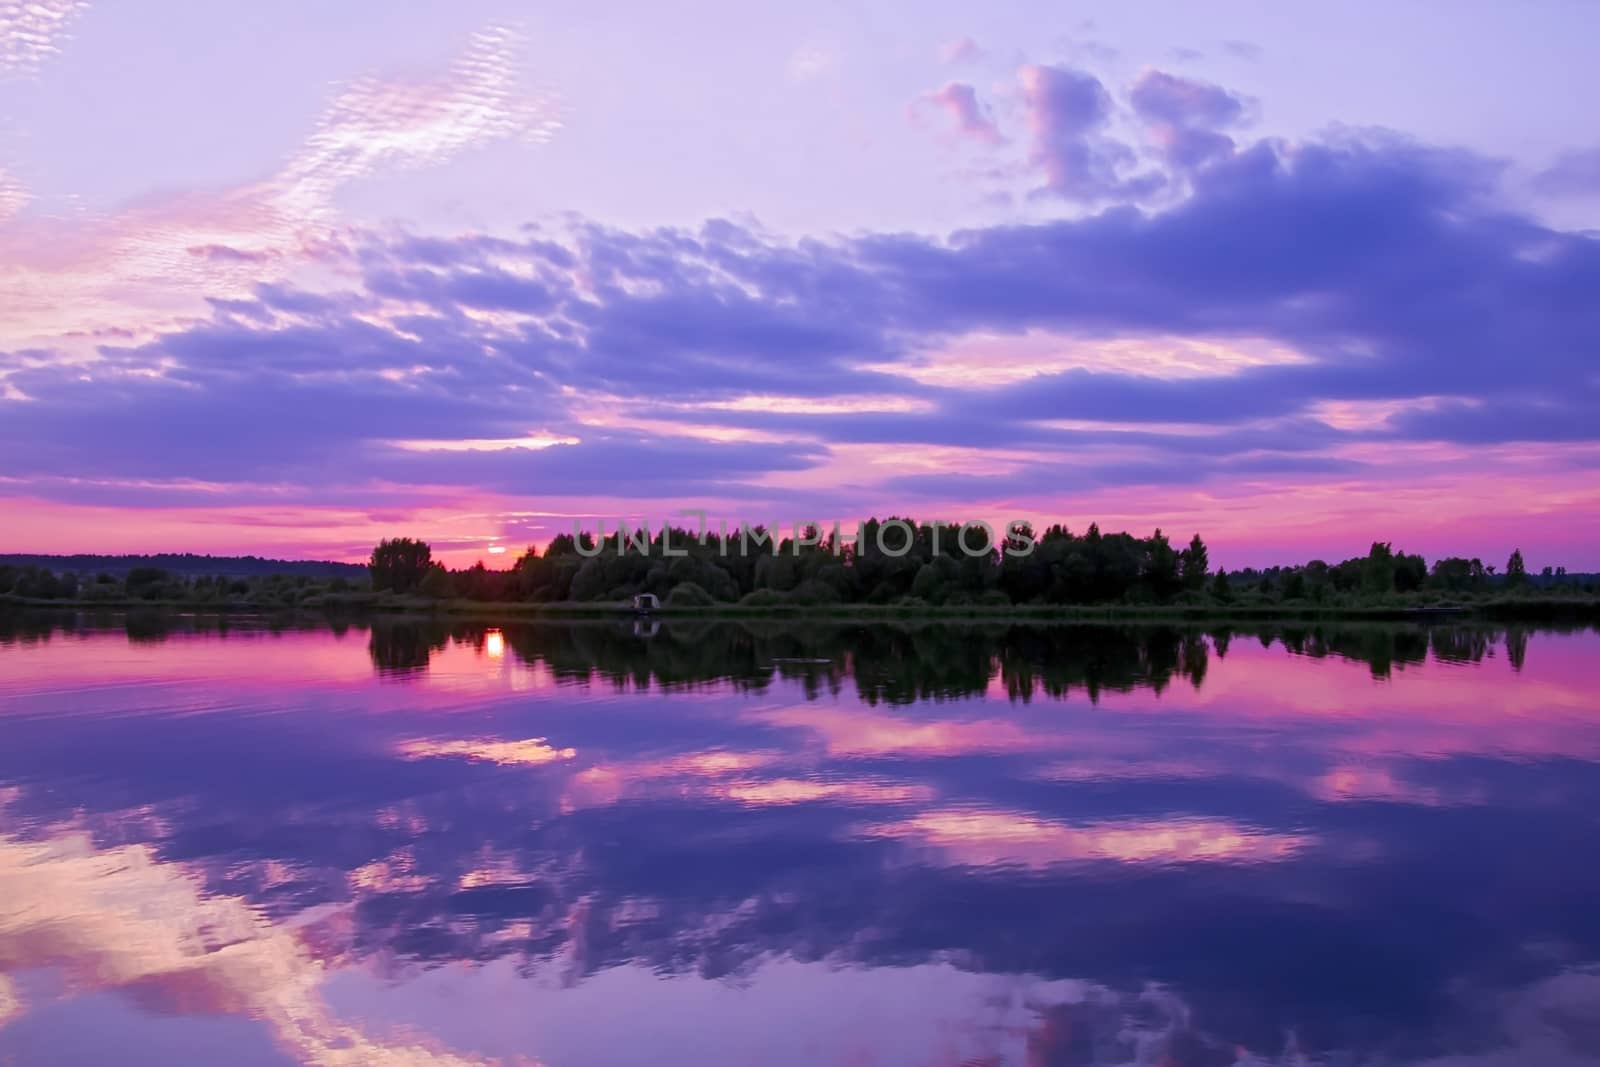 Panorama reflection of sunset in the water of the lake. The sky and clouds, illuminated by the sun setting over the horizon, acquired unusual purple and lilac colors.